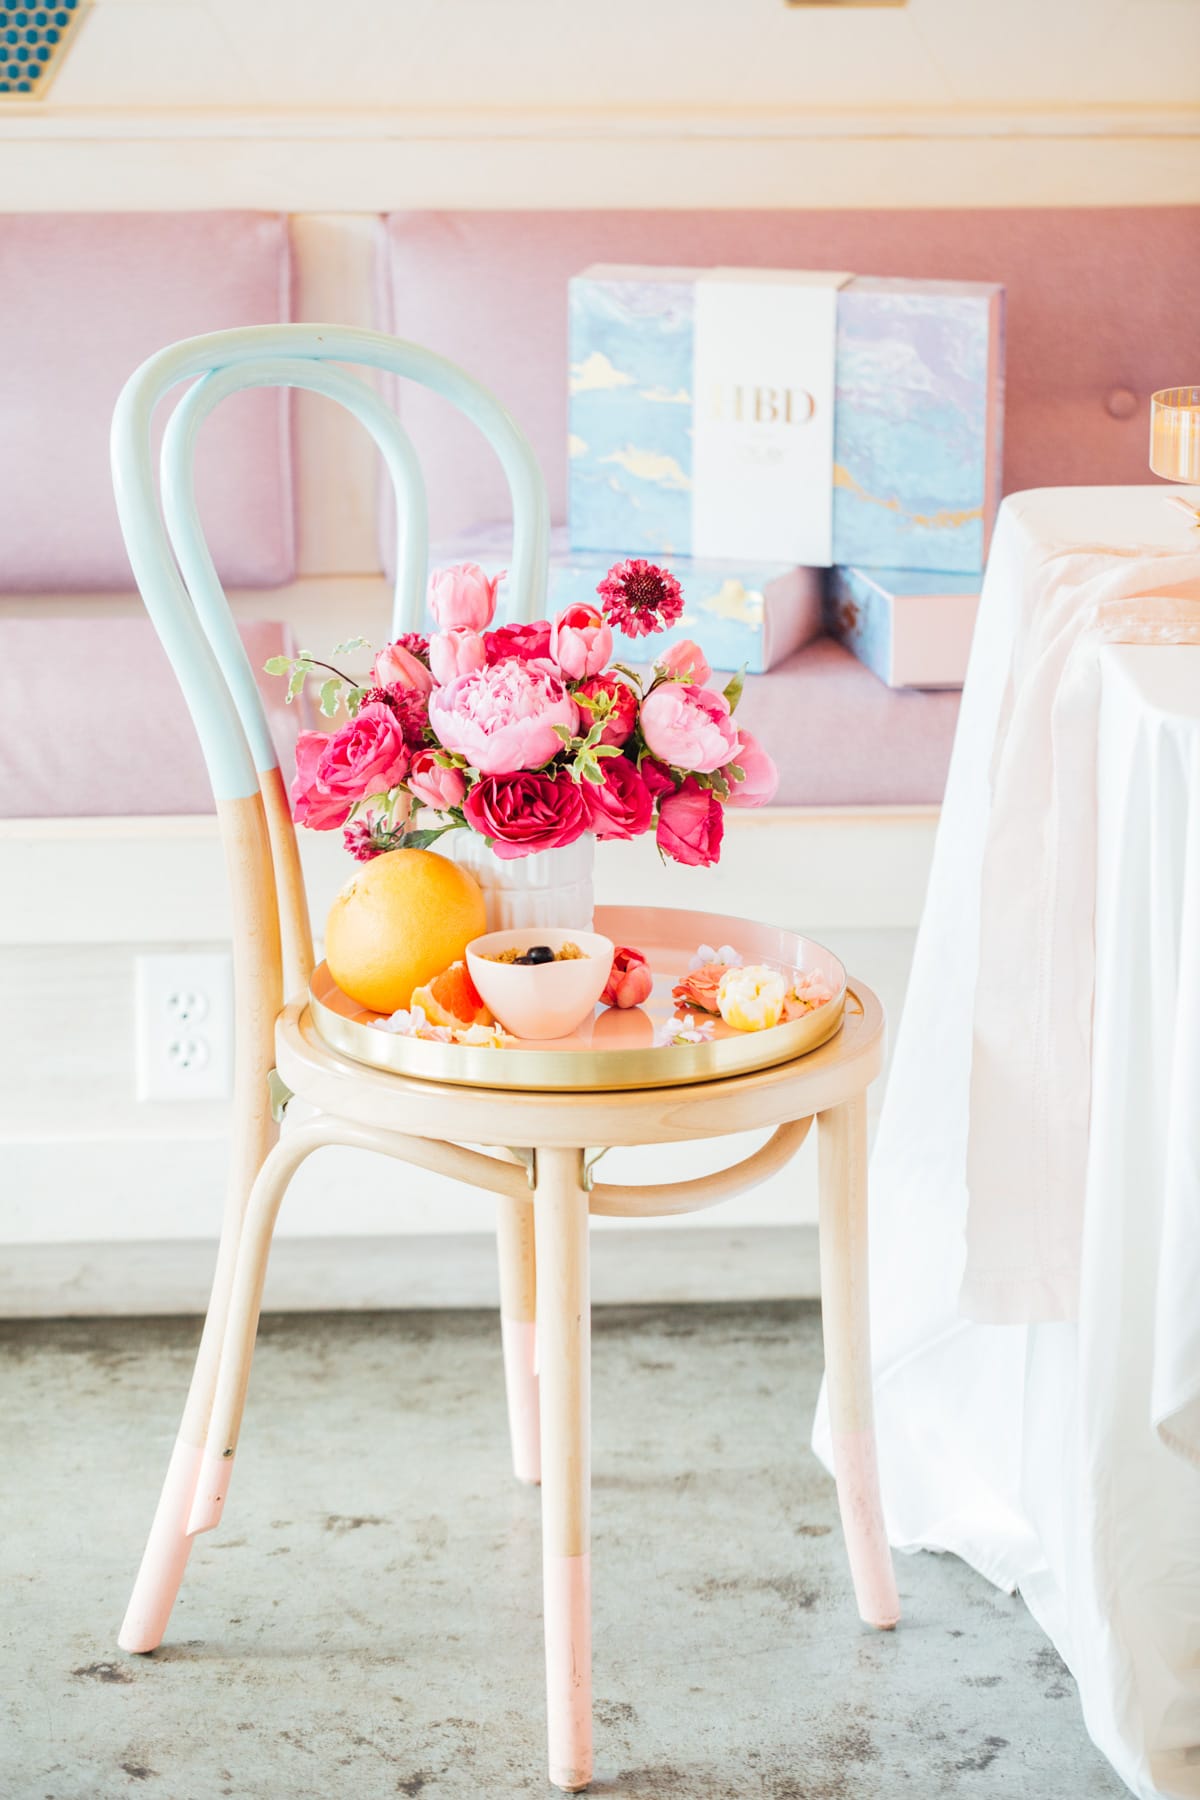 Spring flower ideas - A Perfectly Pastel Easter Table Idea by top Houston lifestyle blogger Ashley Rose of Sugar & Cloth #diy #tablescape #ideas #easter #pastel #party #decorations #brunch #bridalshower #bridal #shower #baby